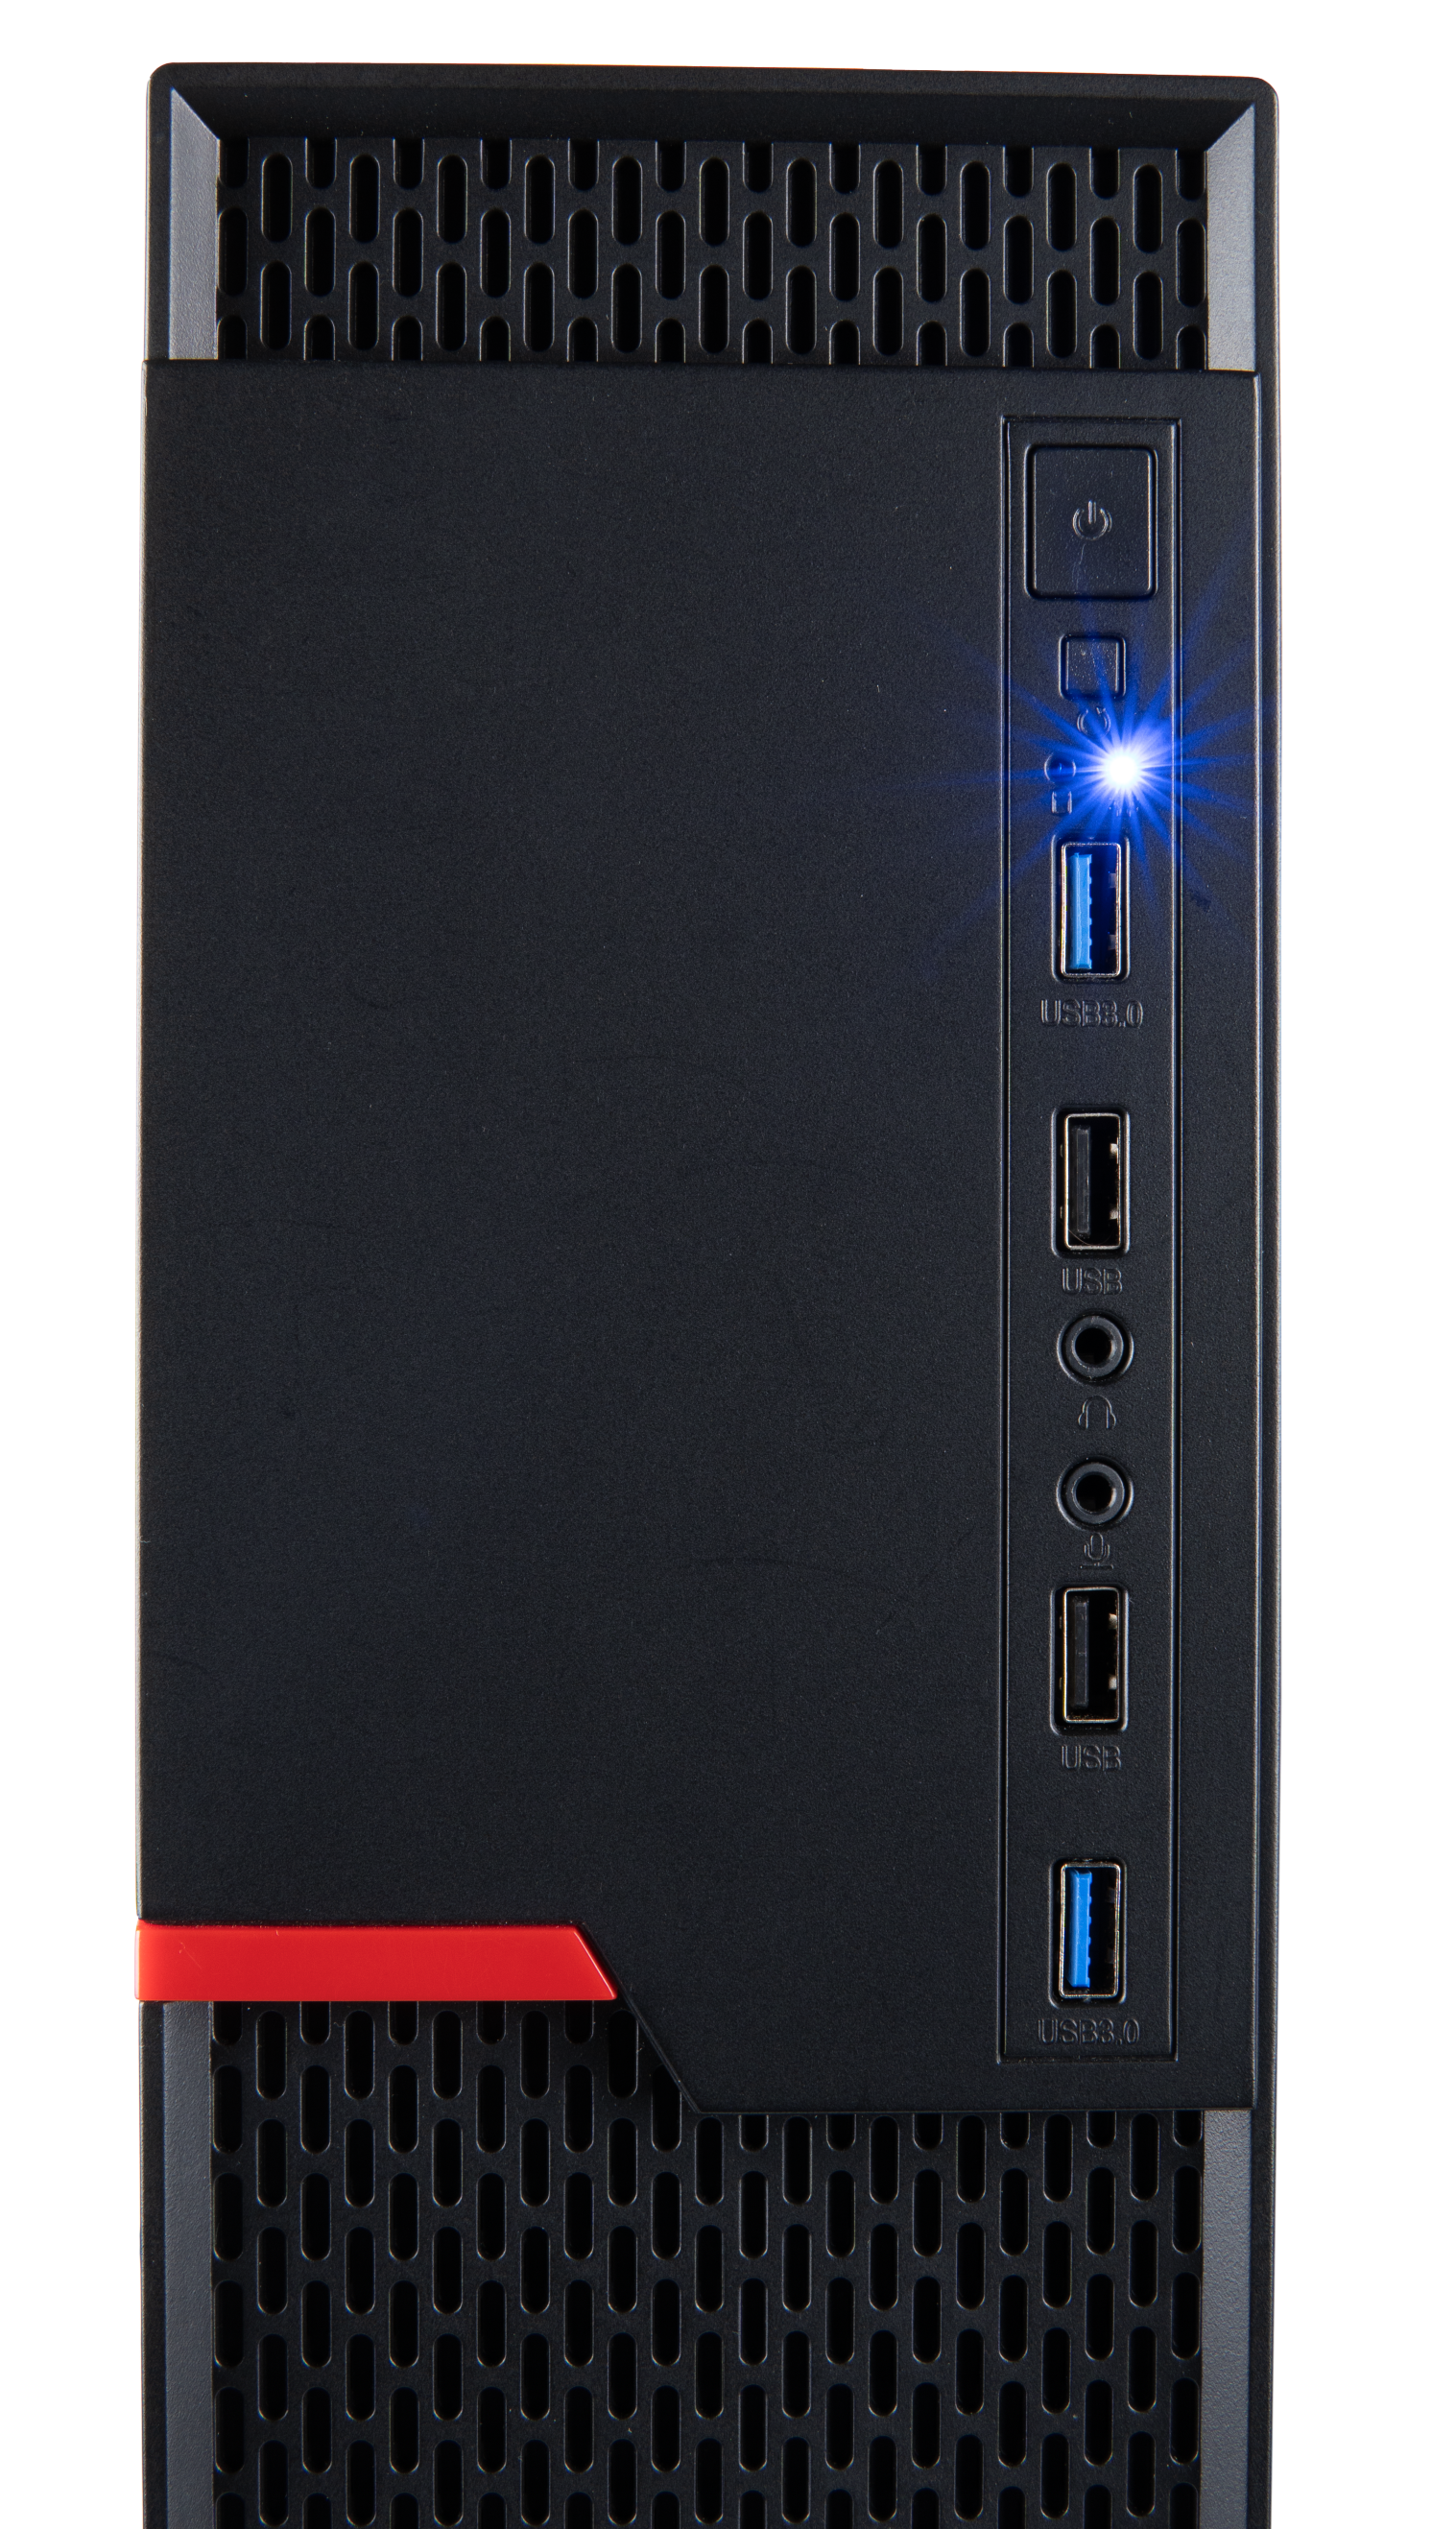 The Envision S13 PC has all the ports you’ll need in a business desktop.